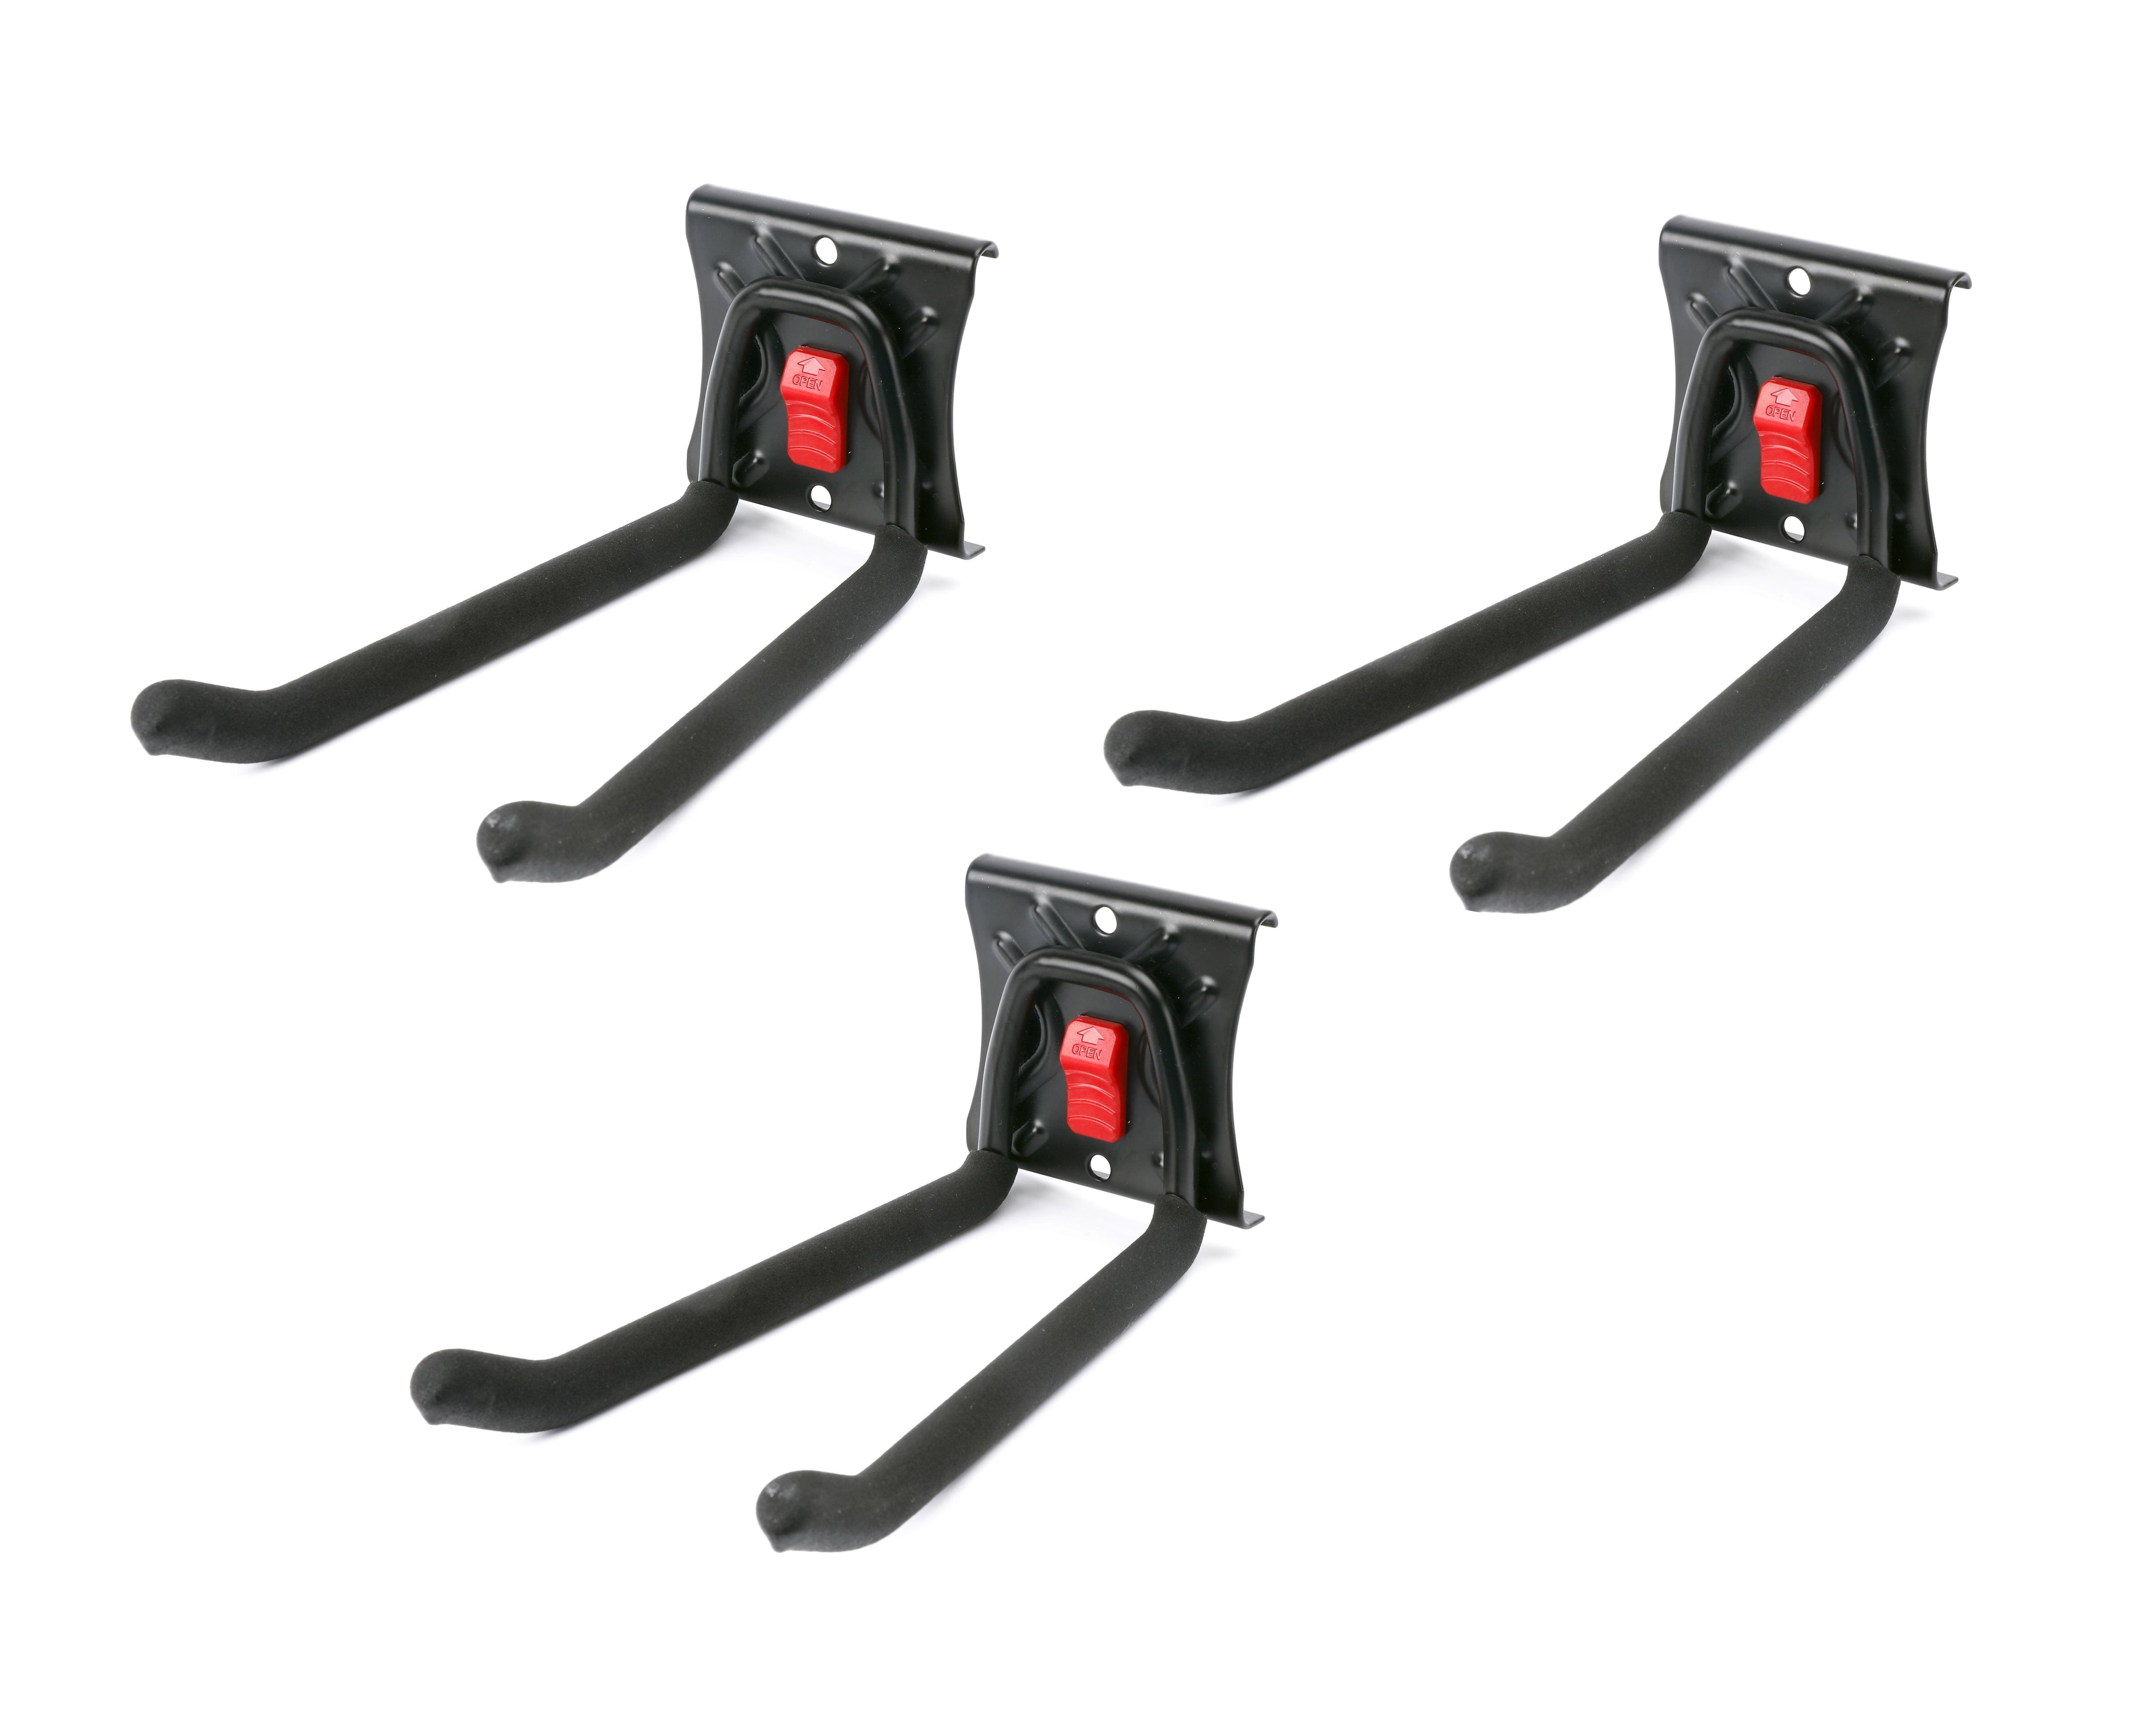 Hyper Tough 6-inch Quick Release Straight Hook for Snap Rail Storage System, 3-Pack